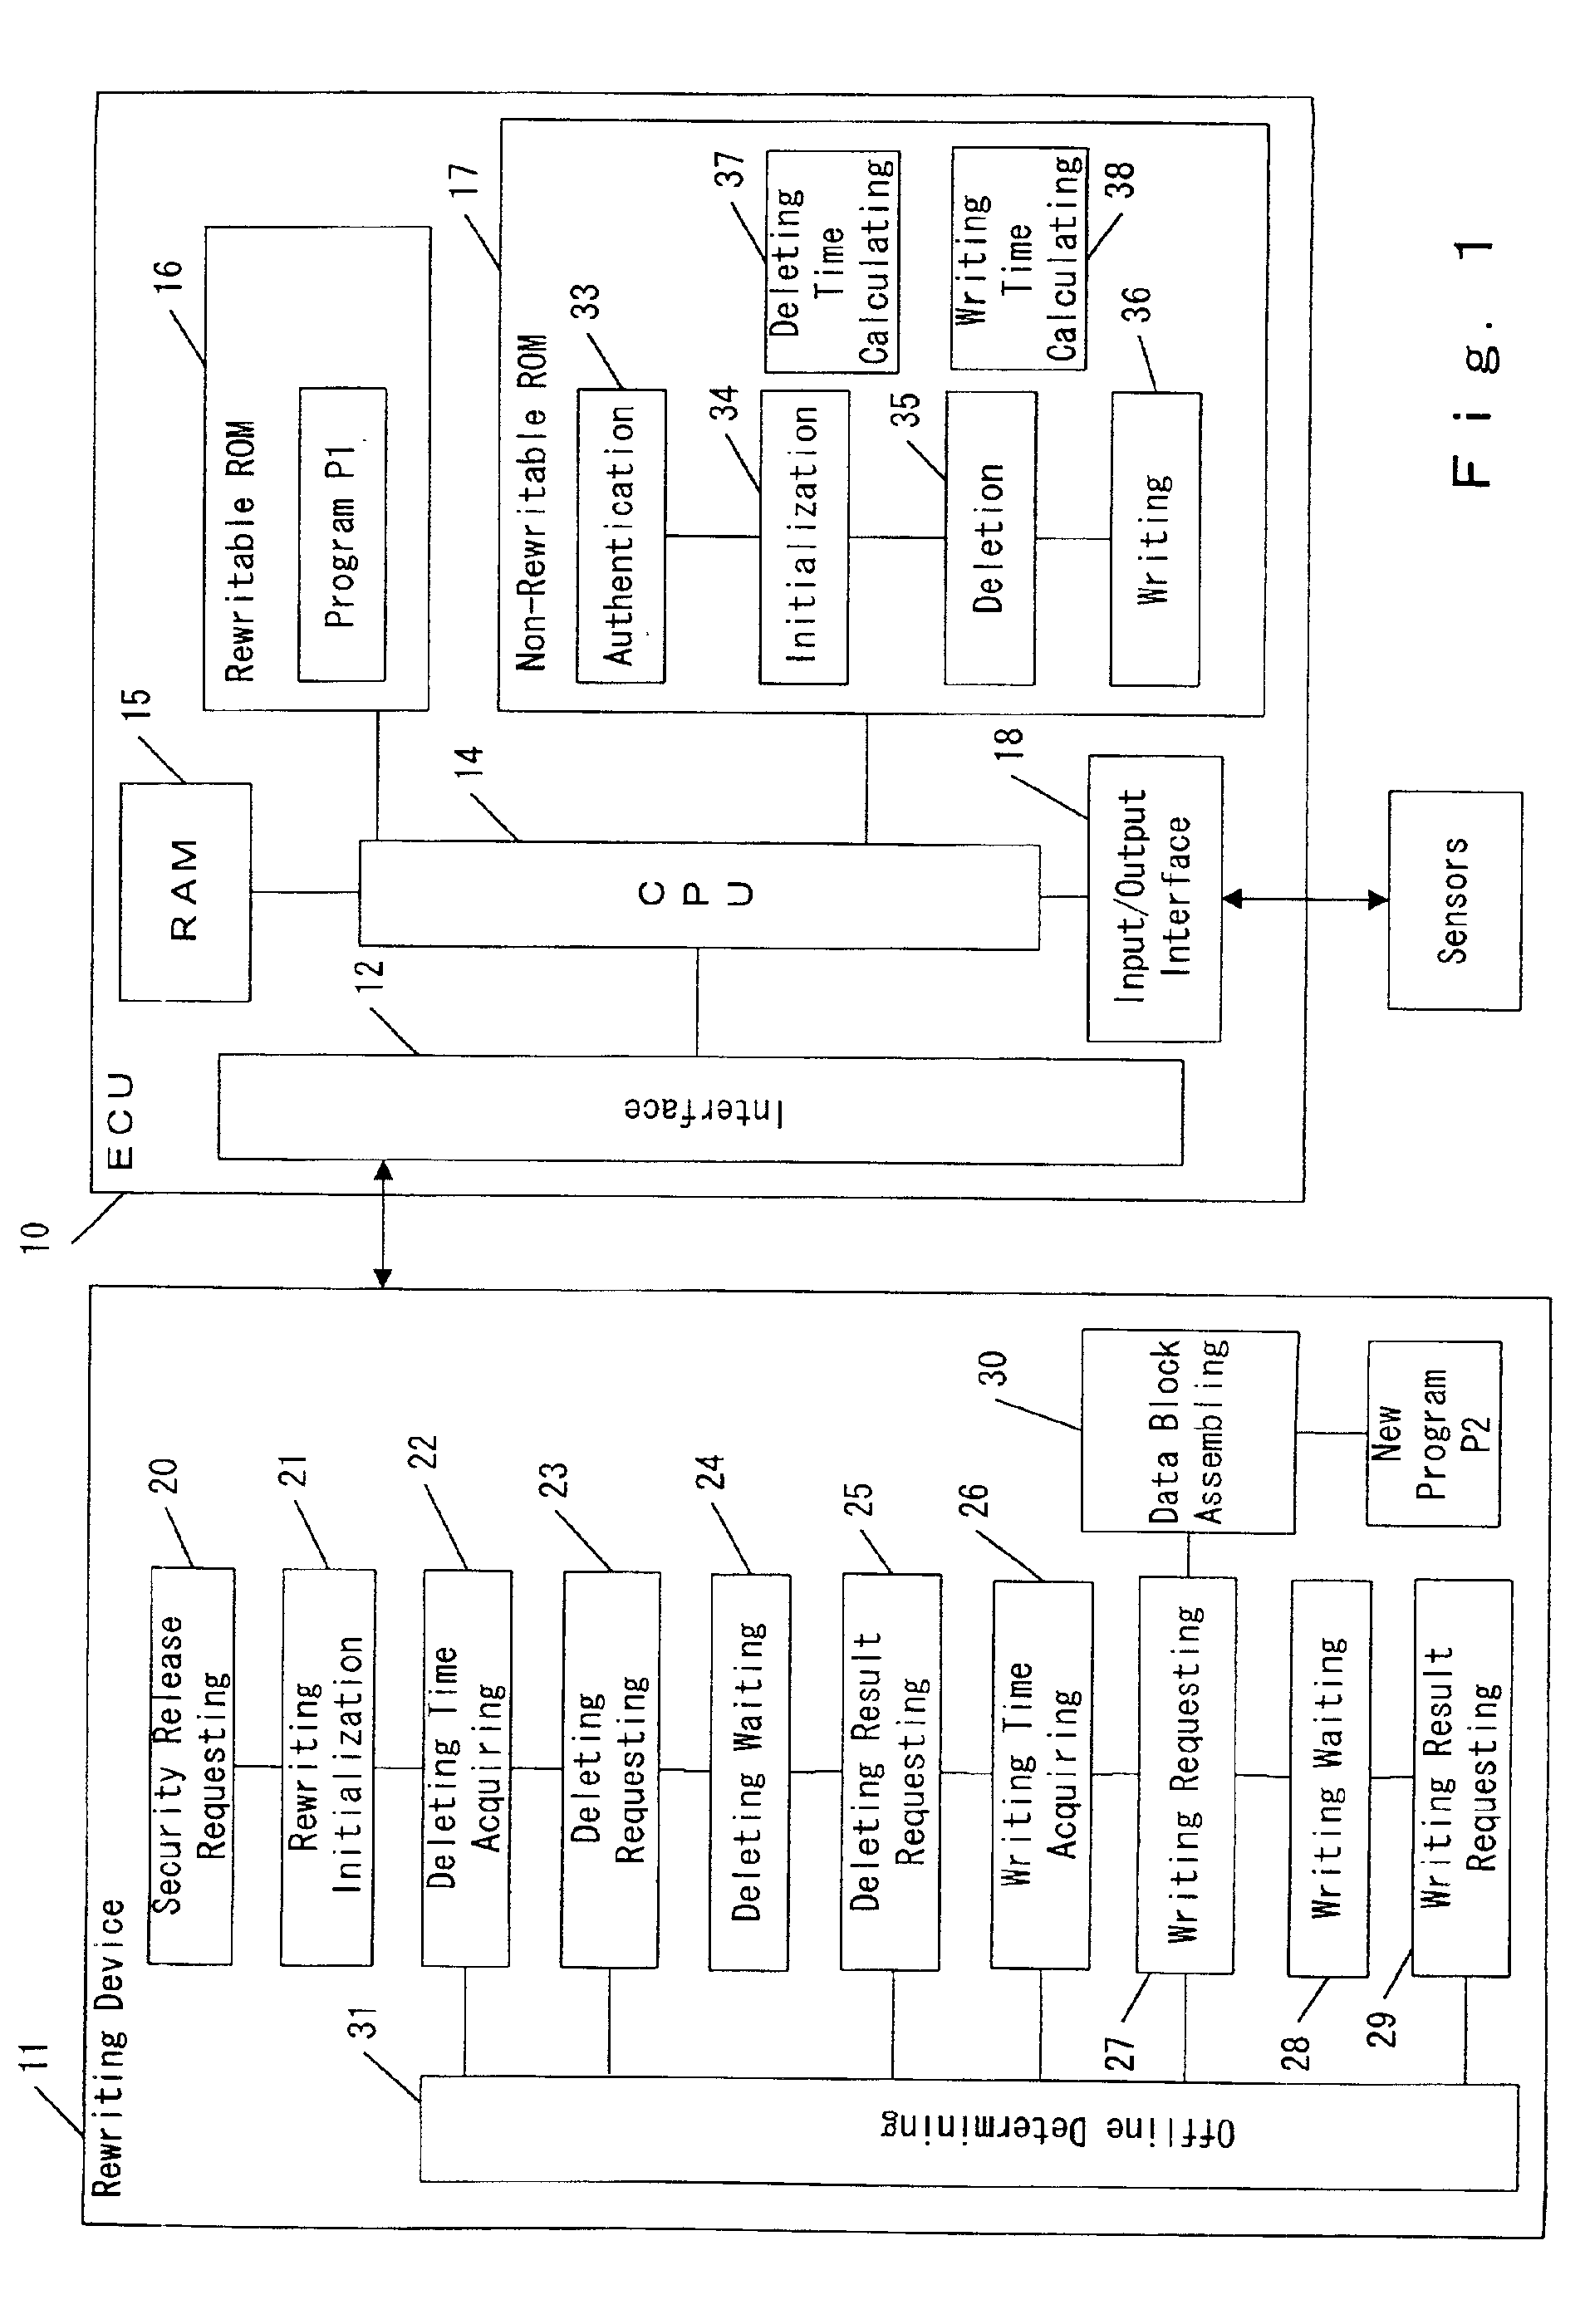 Rewriting system for vehicle controller